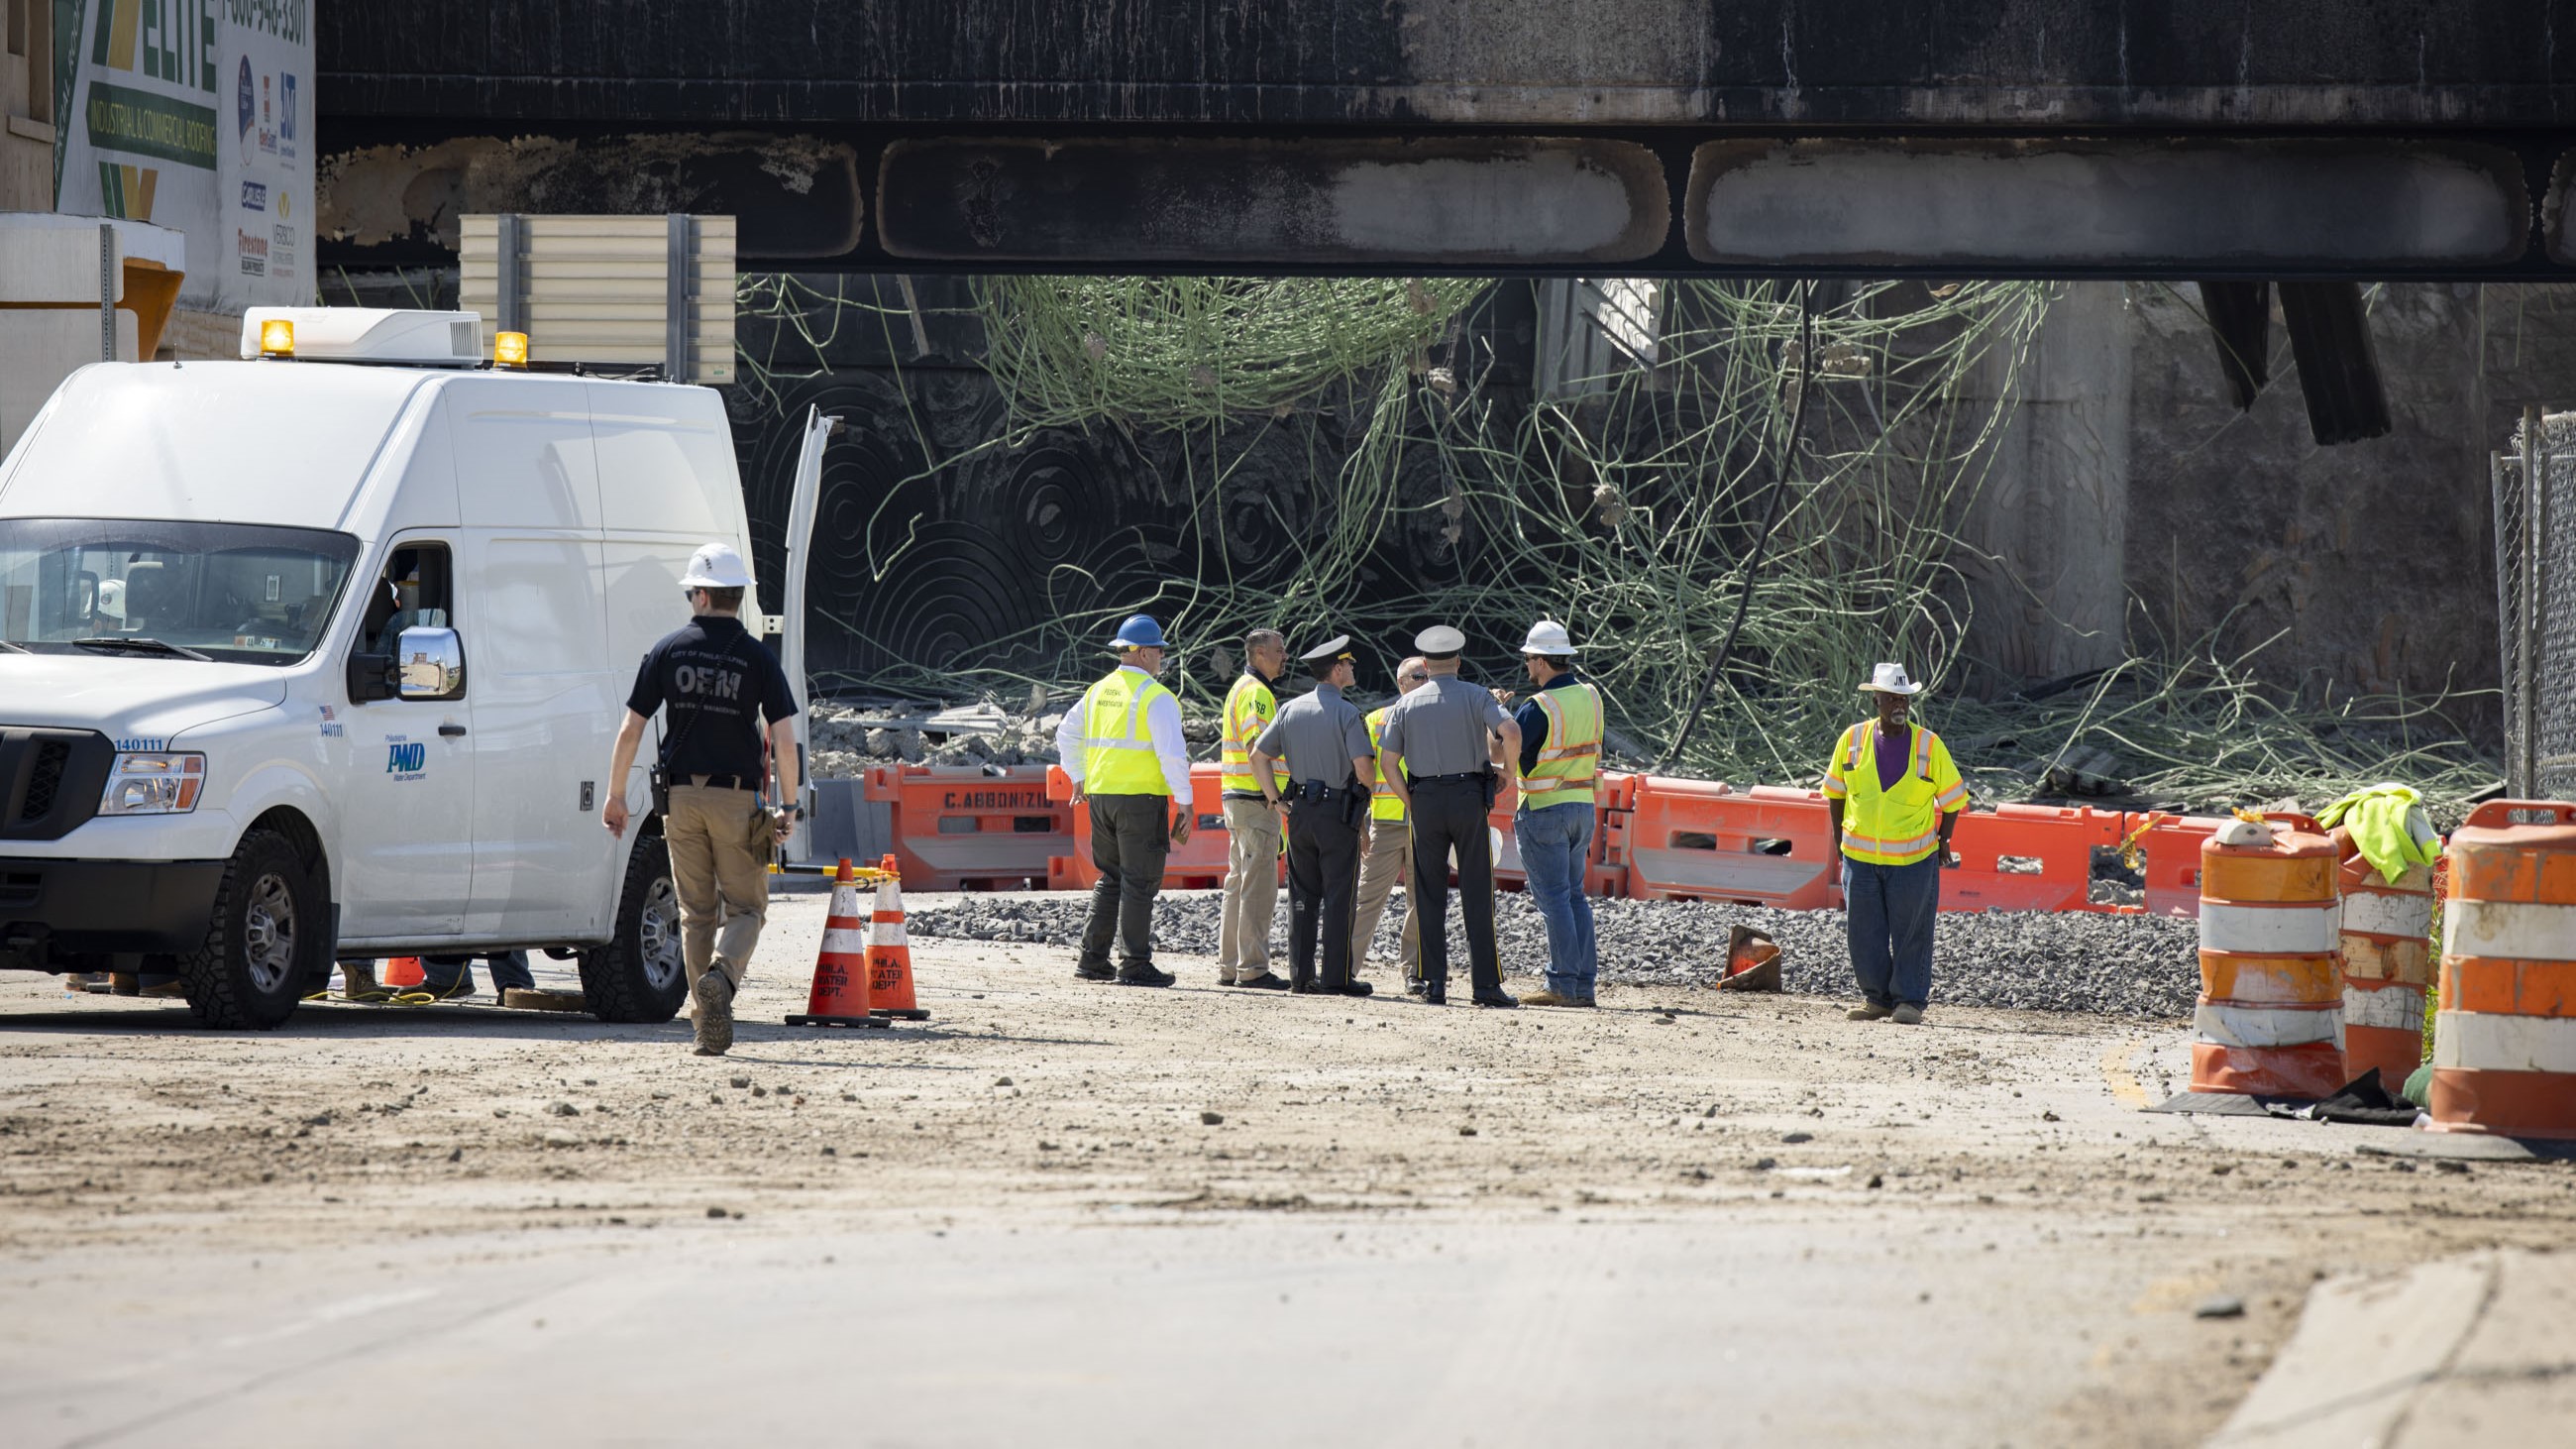 Pennsylvania State Police officers and several individuals wearing hard hats and yellow safety vests stand conversing near the site of the bridge collapse with orange barricades between them and the debris